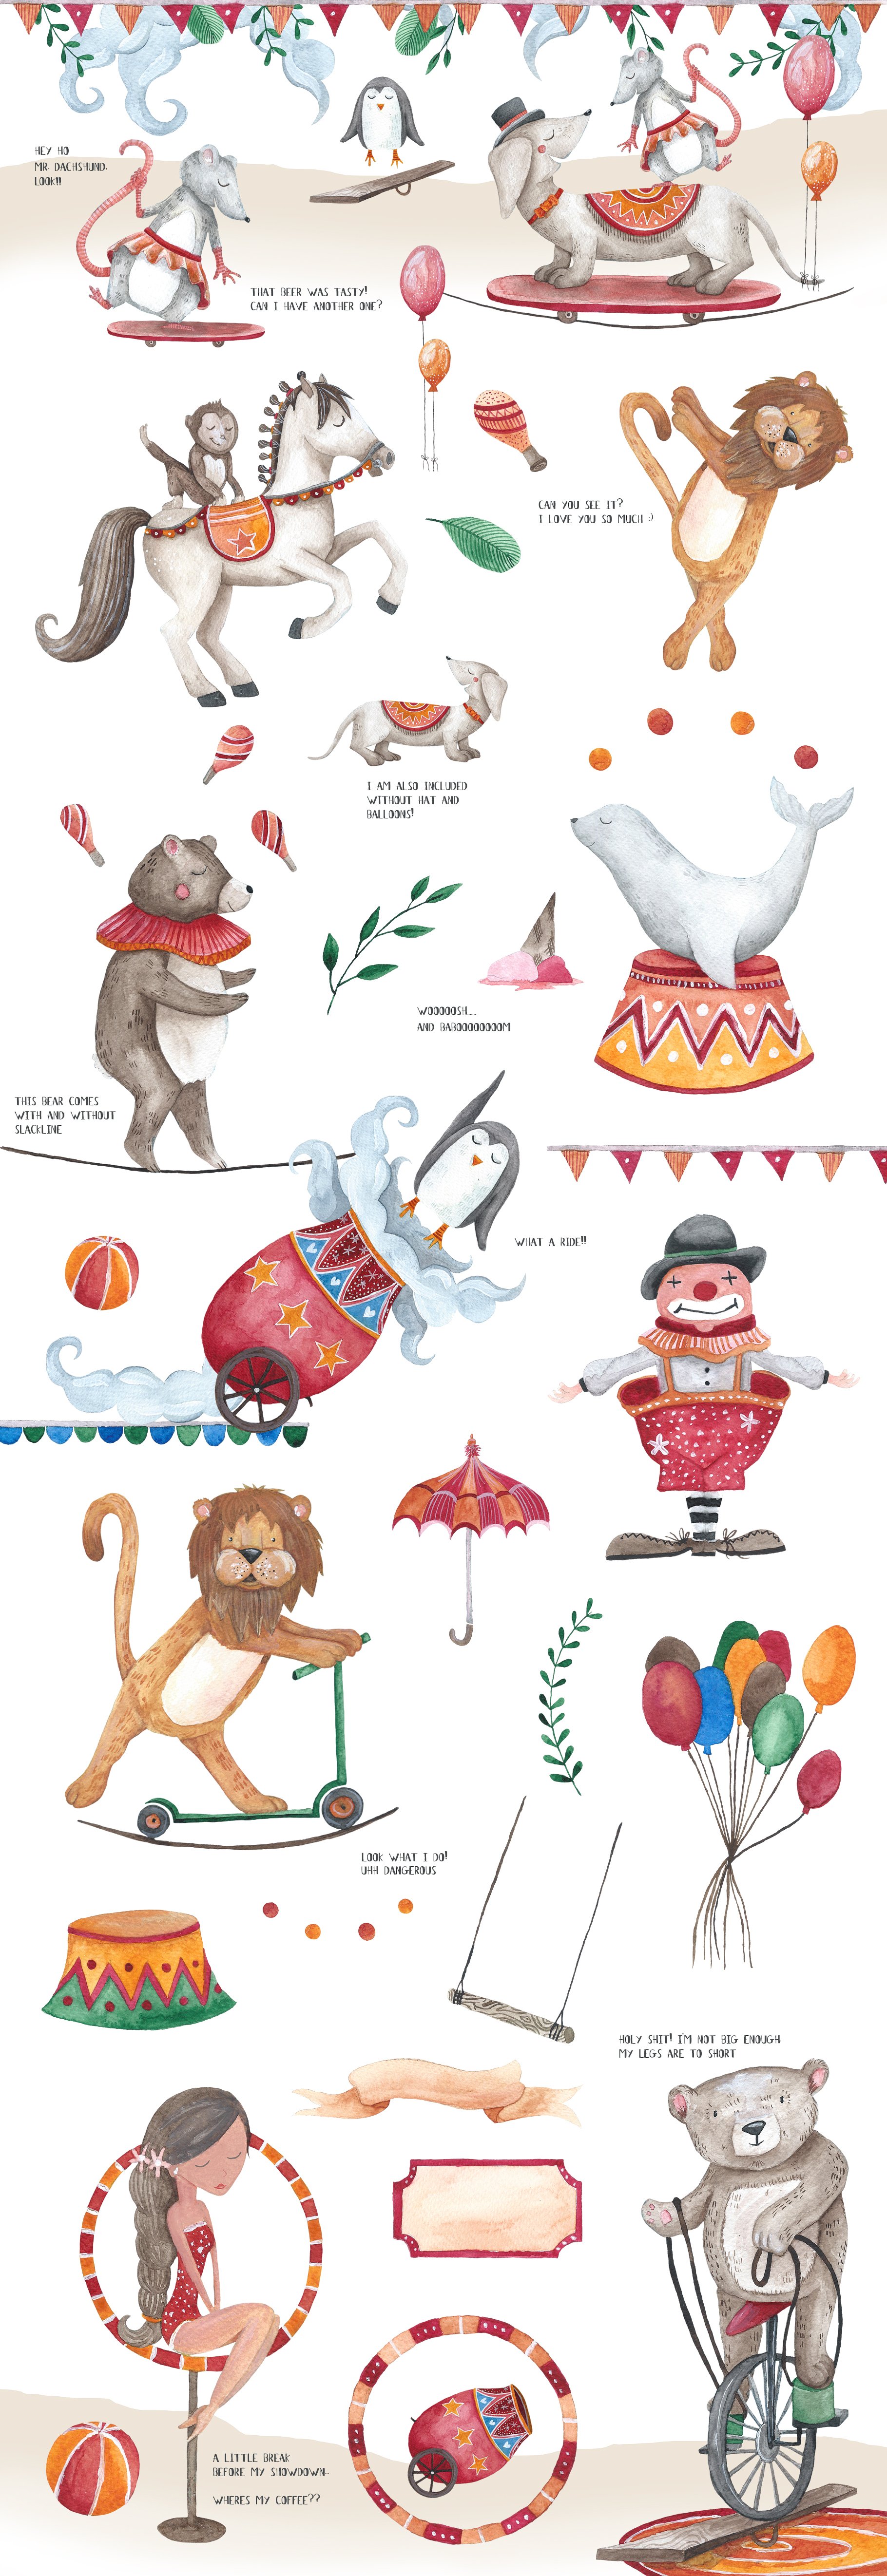 Circus Adventures Graphics elements preview.